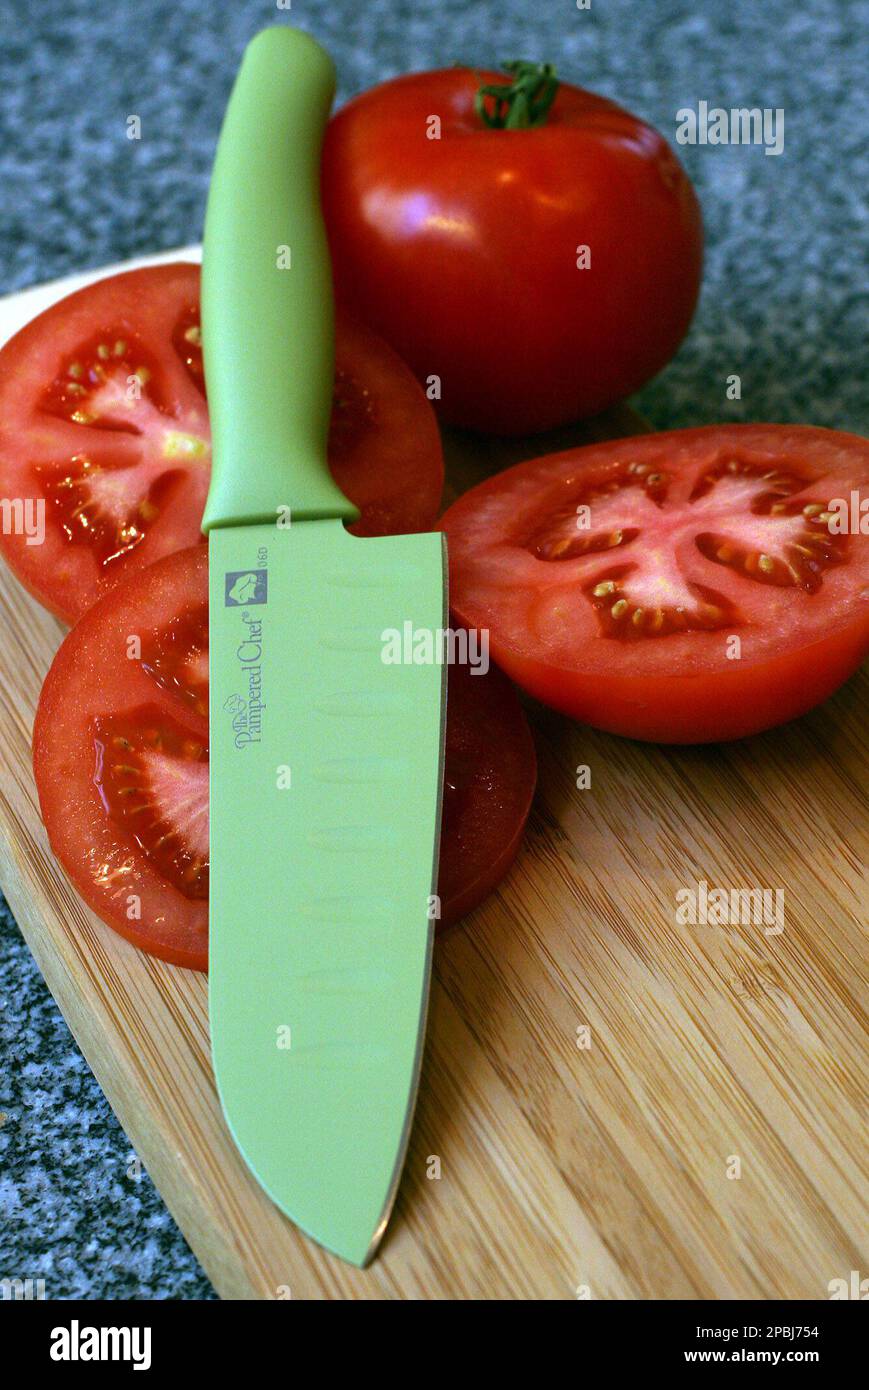 https://c8.alamy.com/comp/2PBJ754/for-use-with-ap-weekly-features-this-color-coated-santoku-knife-from-the-pampered-chef-is-light-weight-and-will-fit-well-in-smaller-hands-ap-photolarry-crowe-2PBJ754.jpg